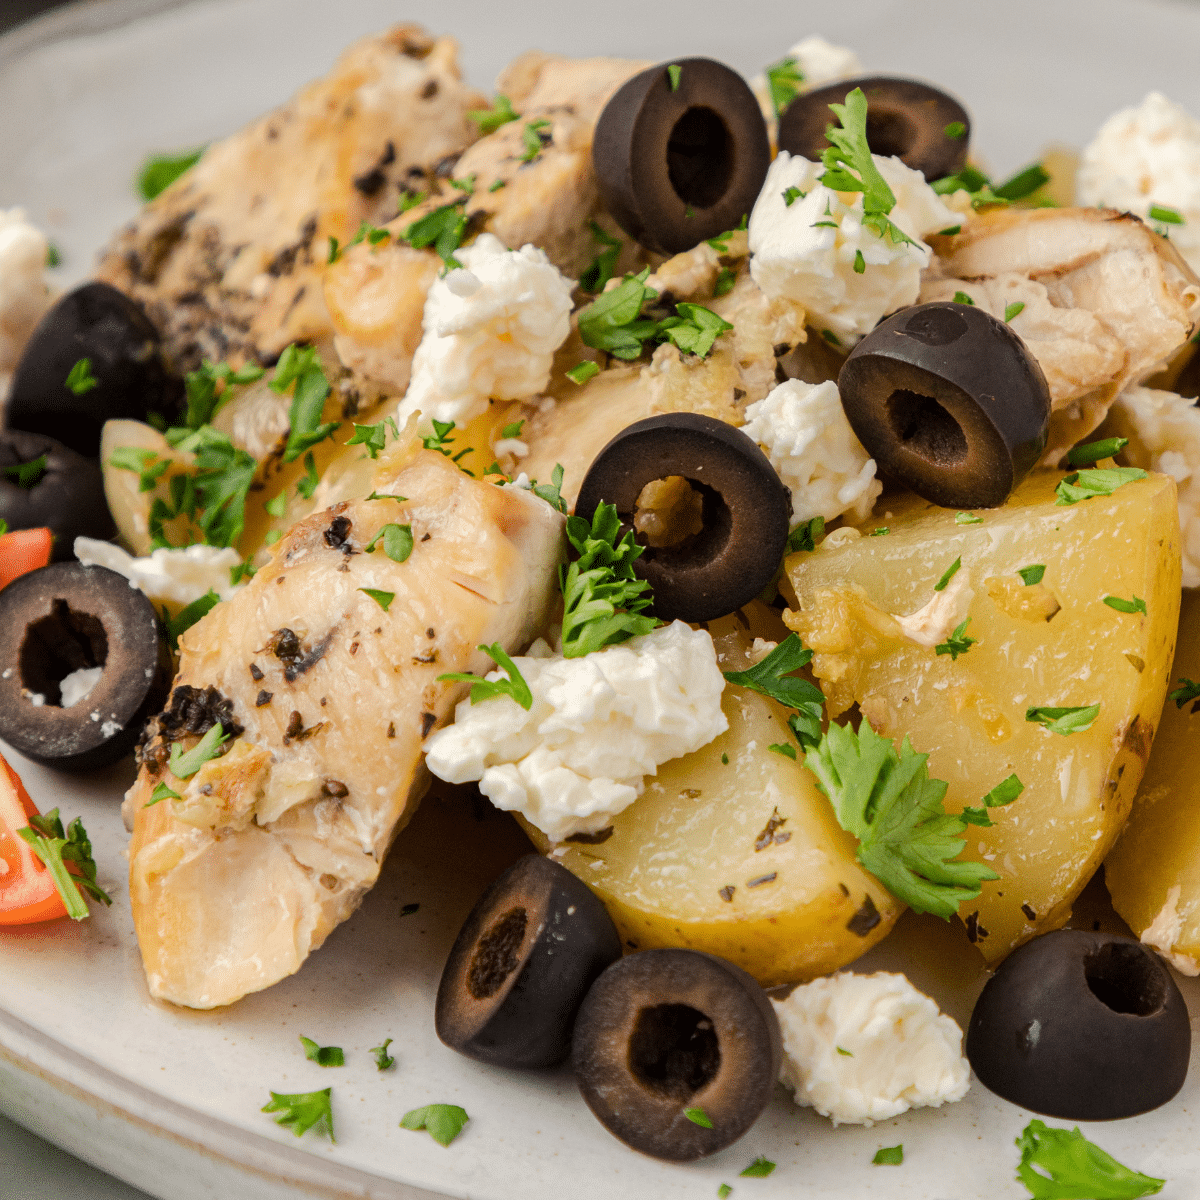 CrockPot chicken and potatoes on a white plate topped with black olives, feta cheese, and chopped parsley